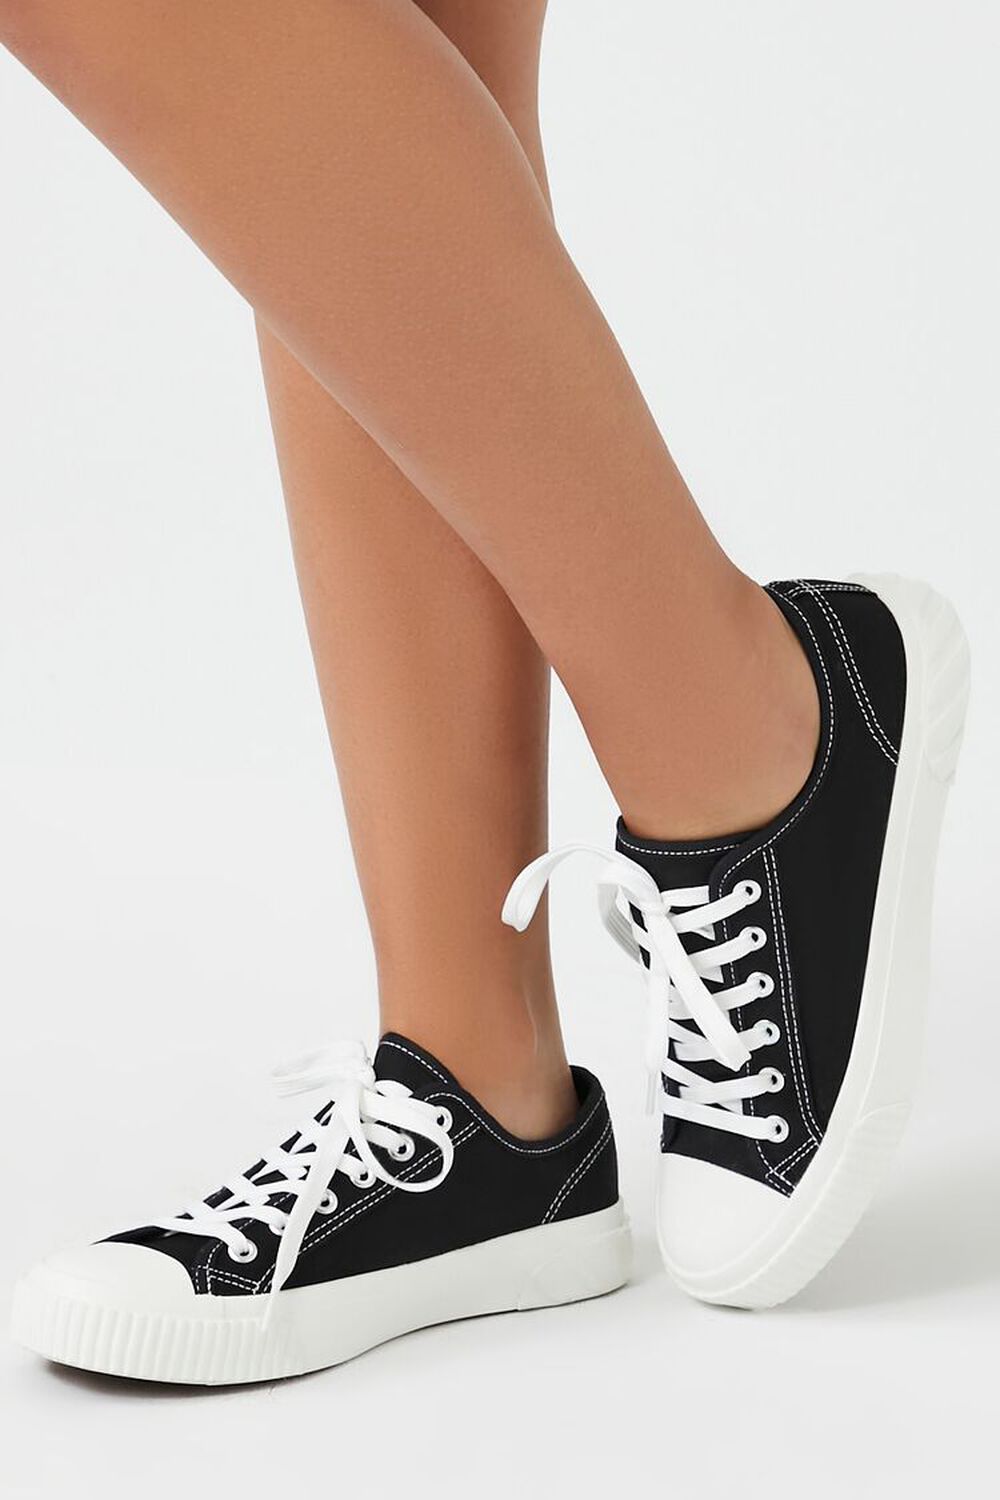 Forever 21, Shoes, Pink And Black Colorblock Sneakers